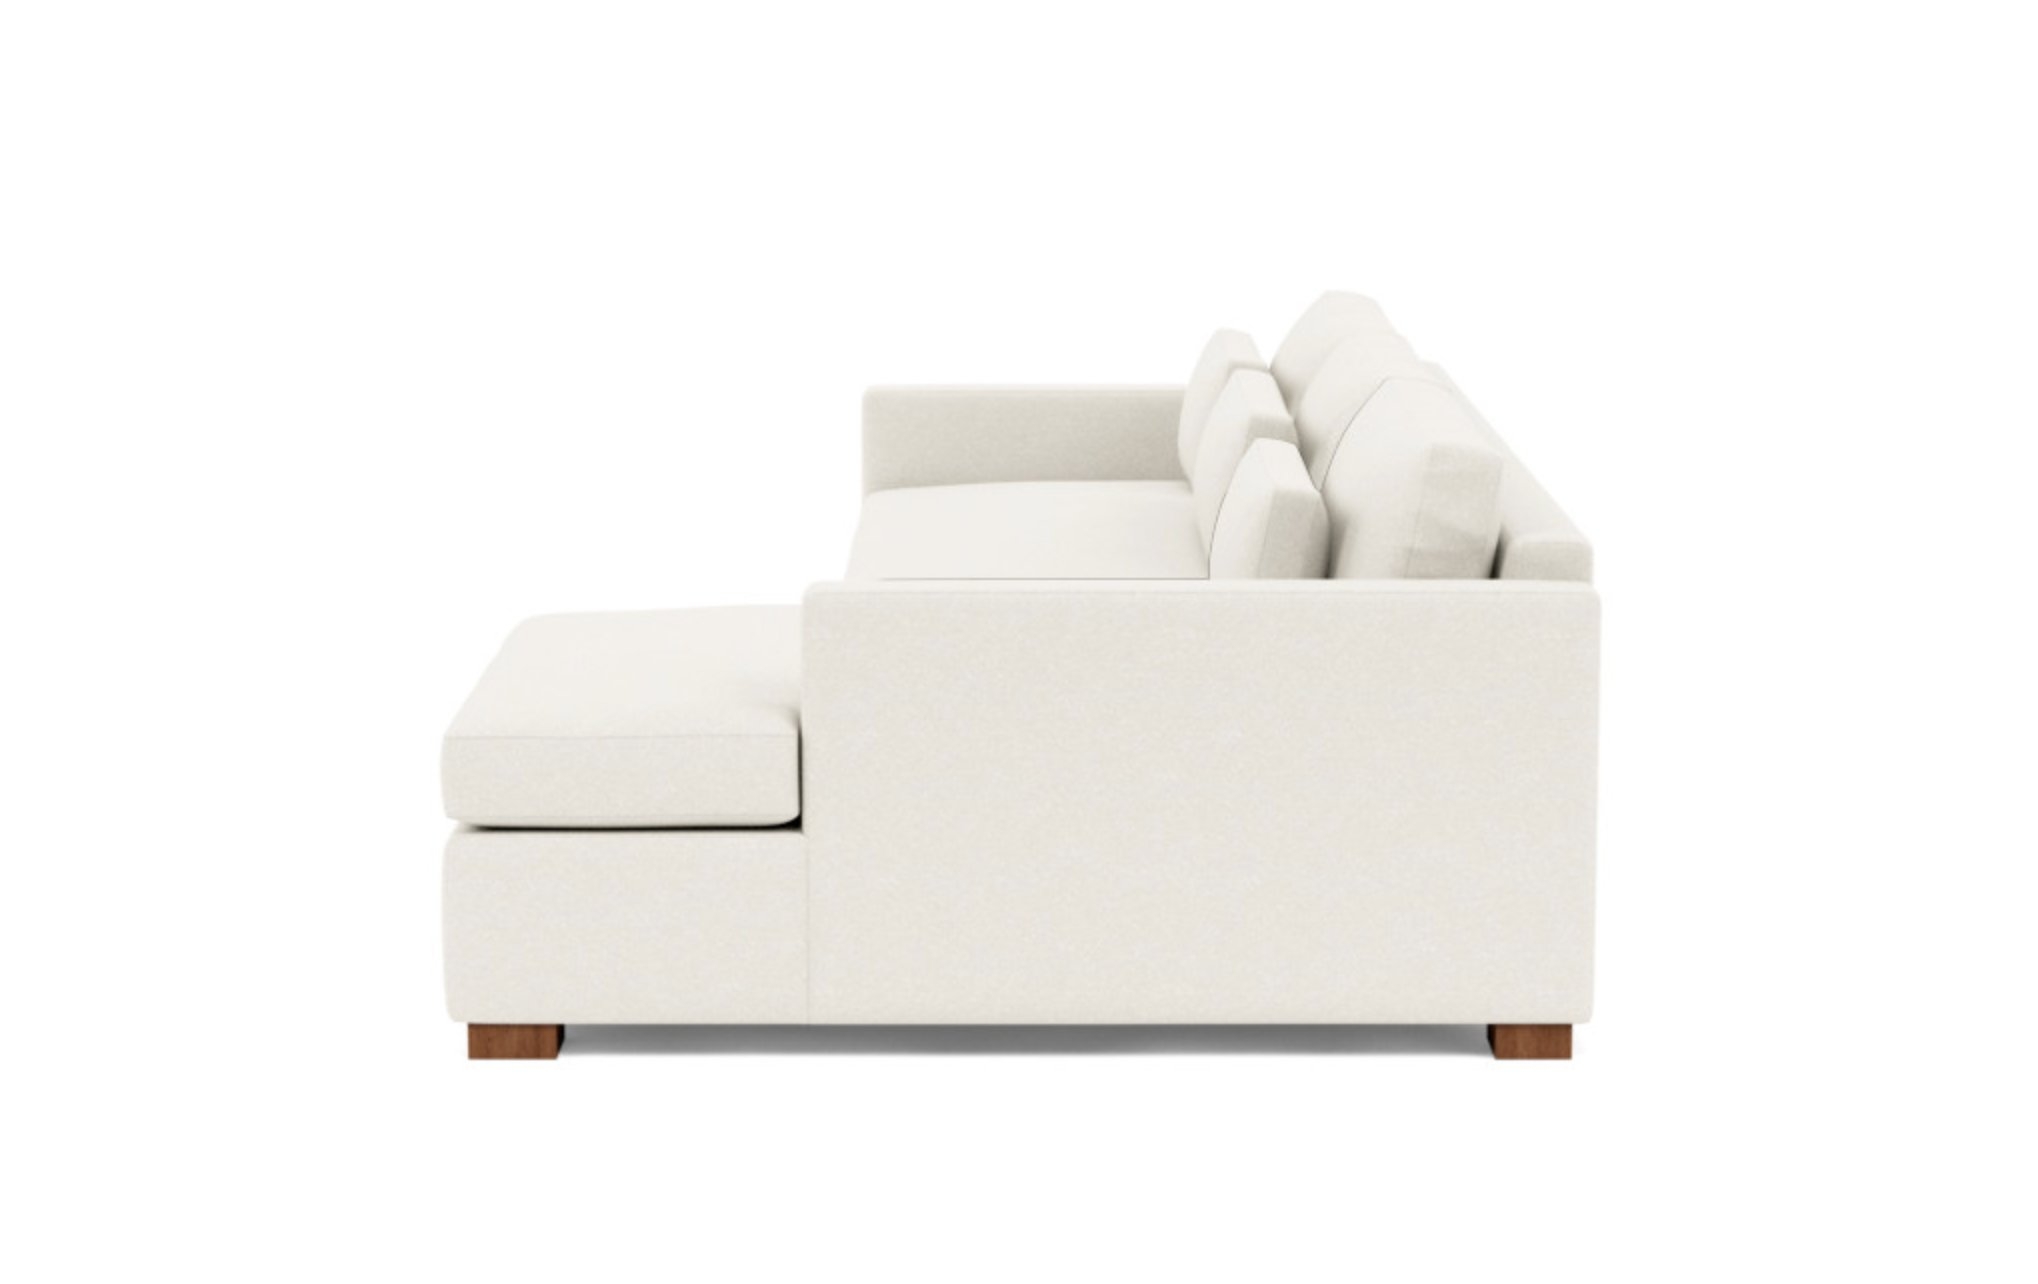 Charly Right Sectional with White Cirrus Fabric and Oiled Walnut legs - Image 3